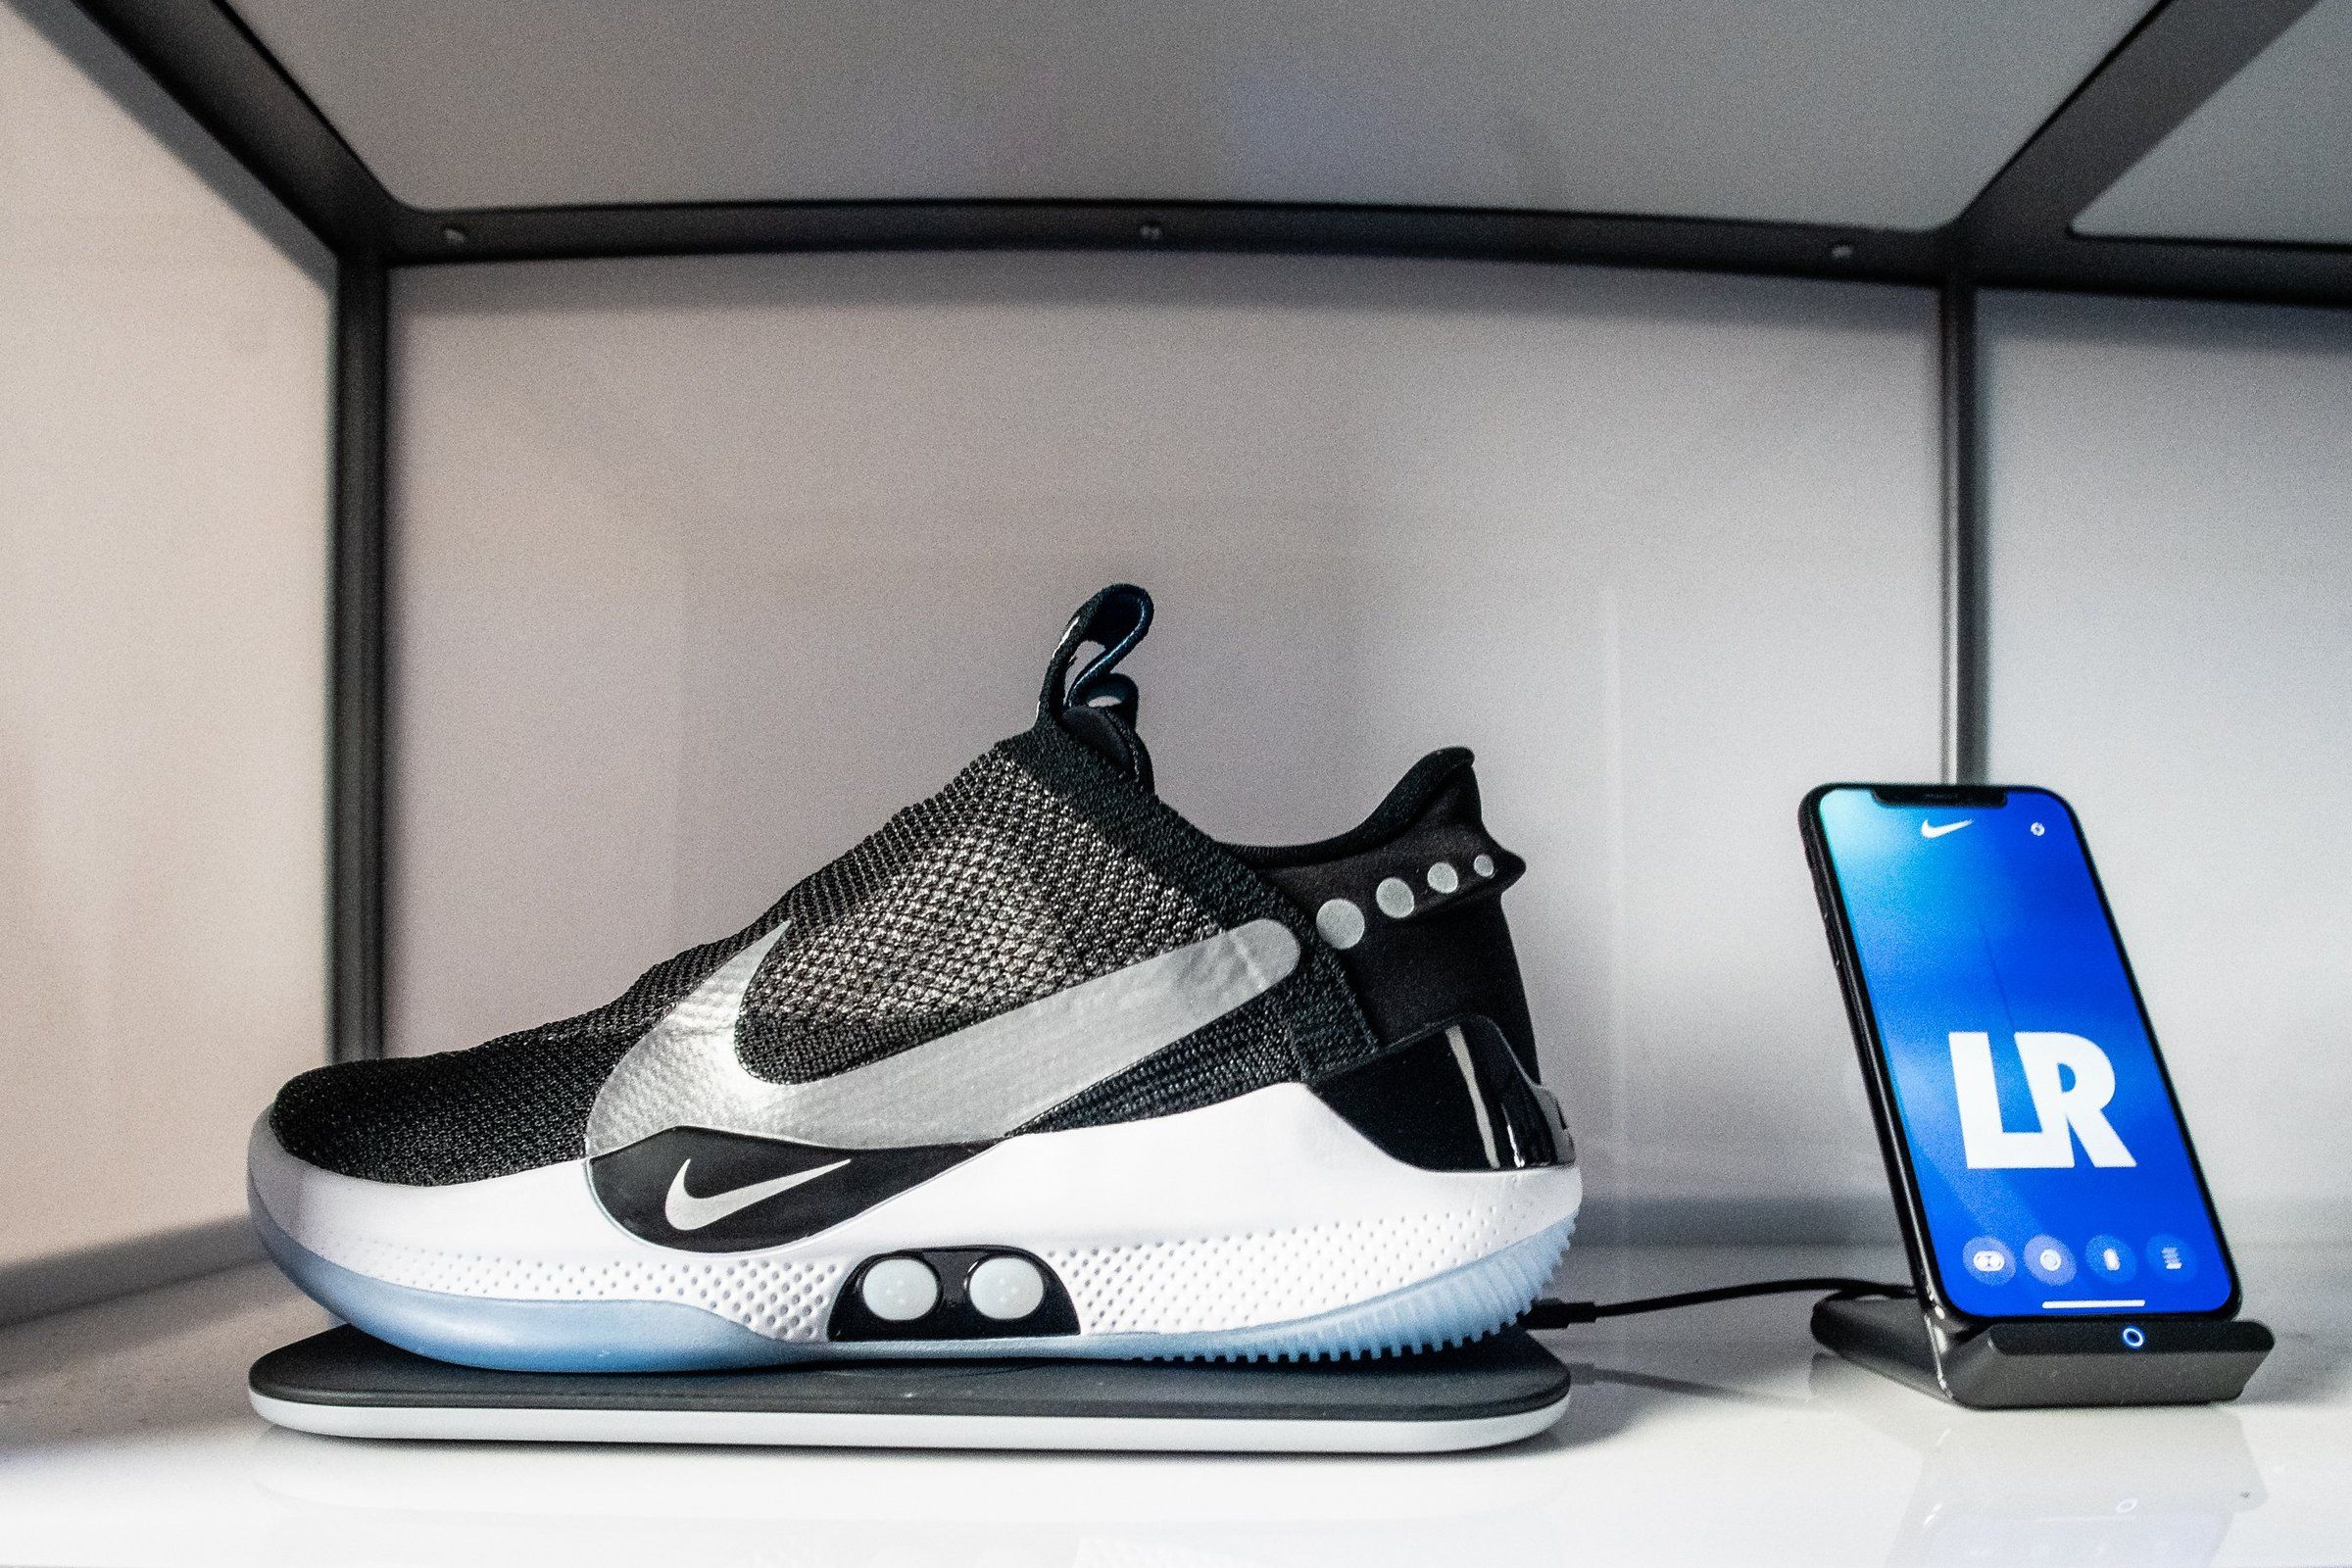 Nike's Self-Lacing Adapt BB Basketball Shoe Is Actually Smart | WIRED